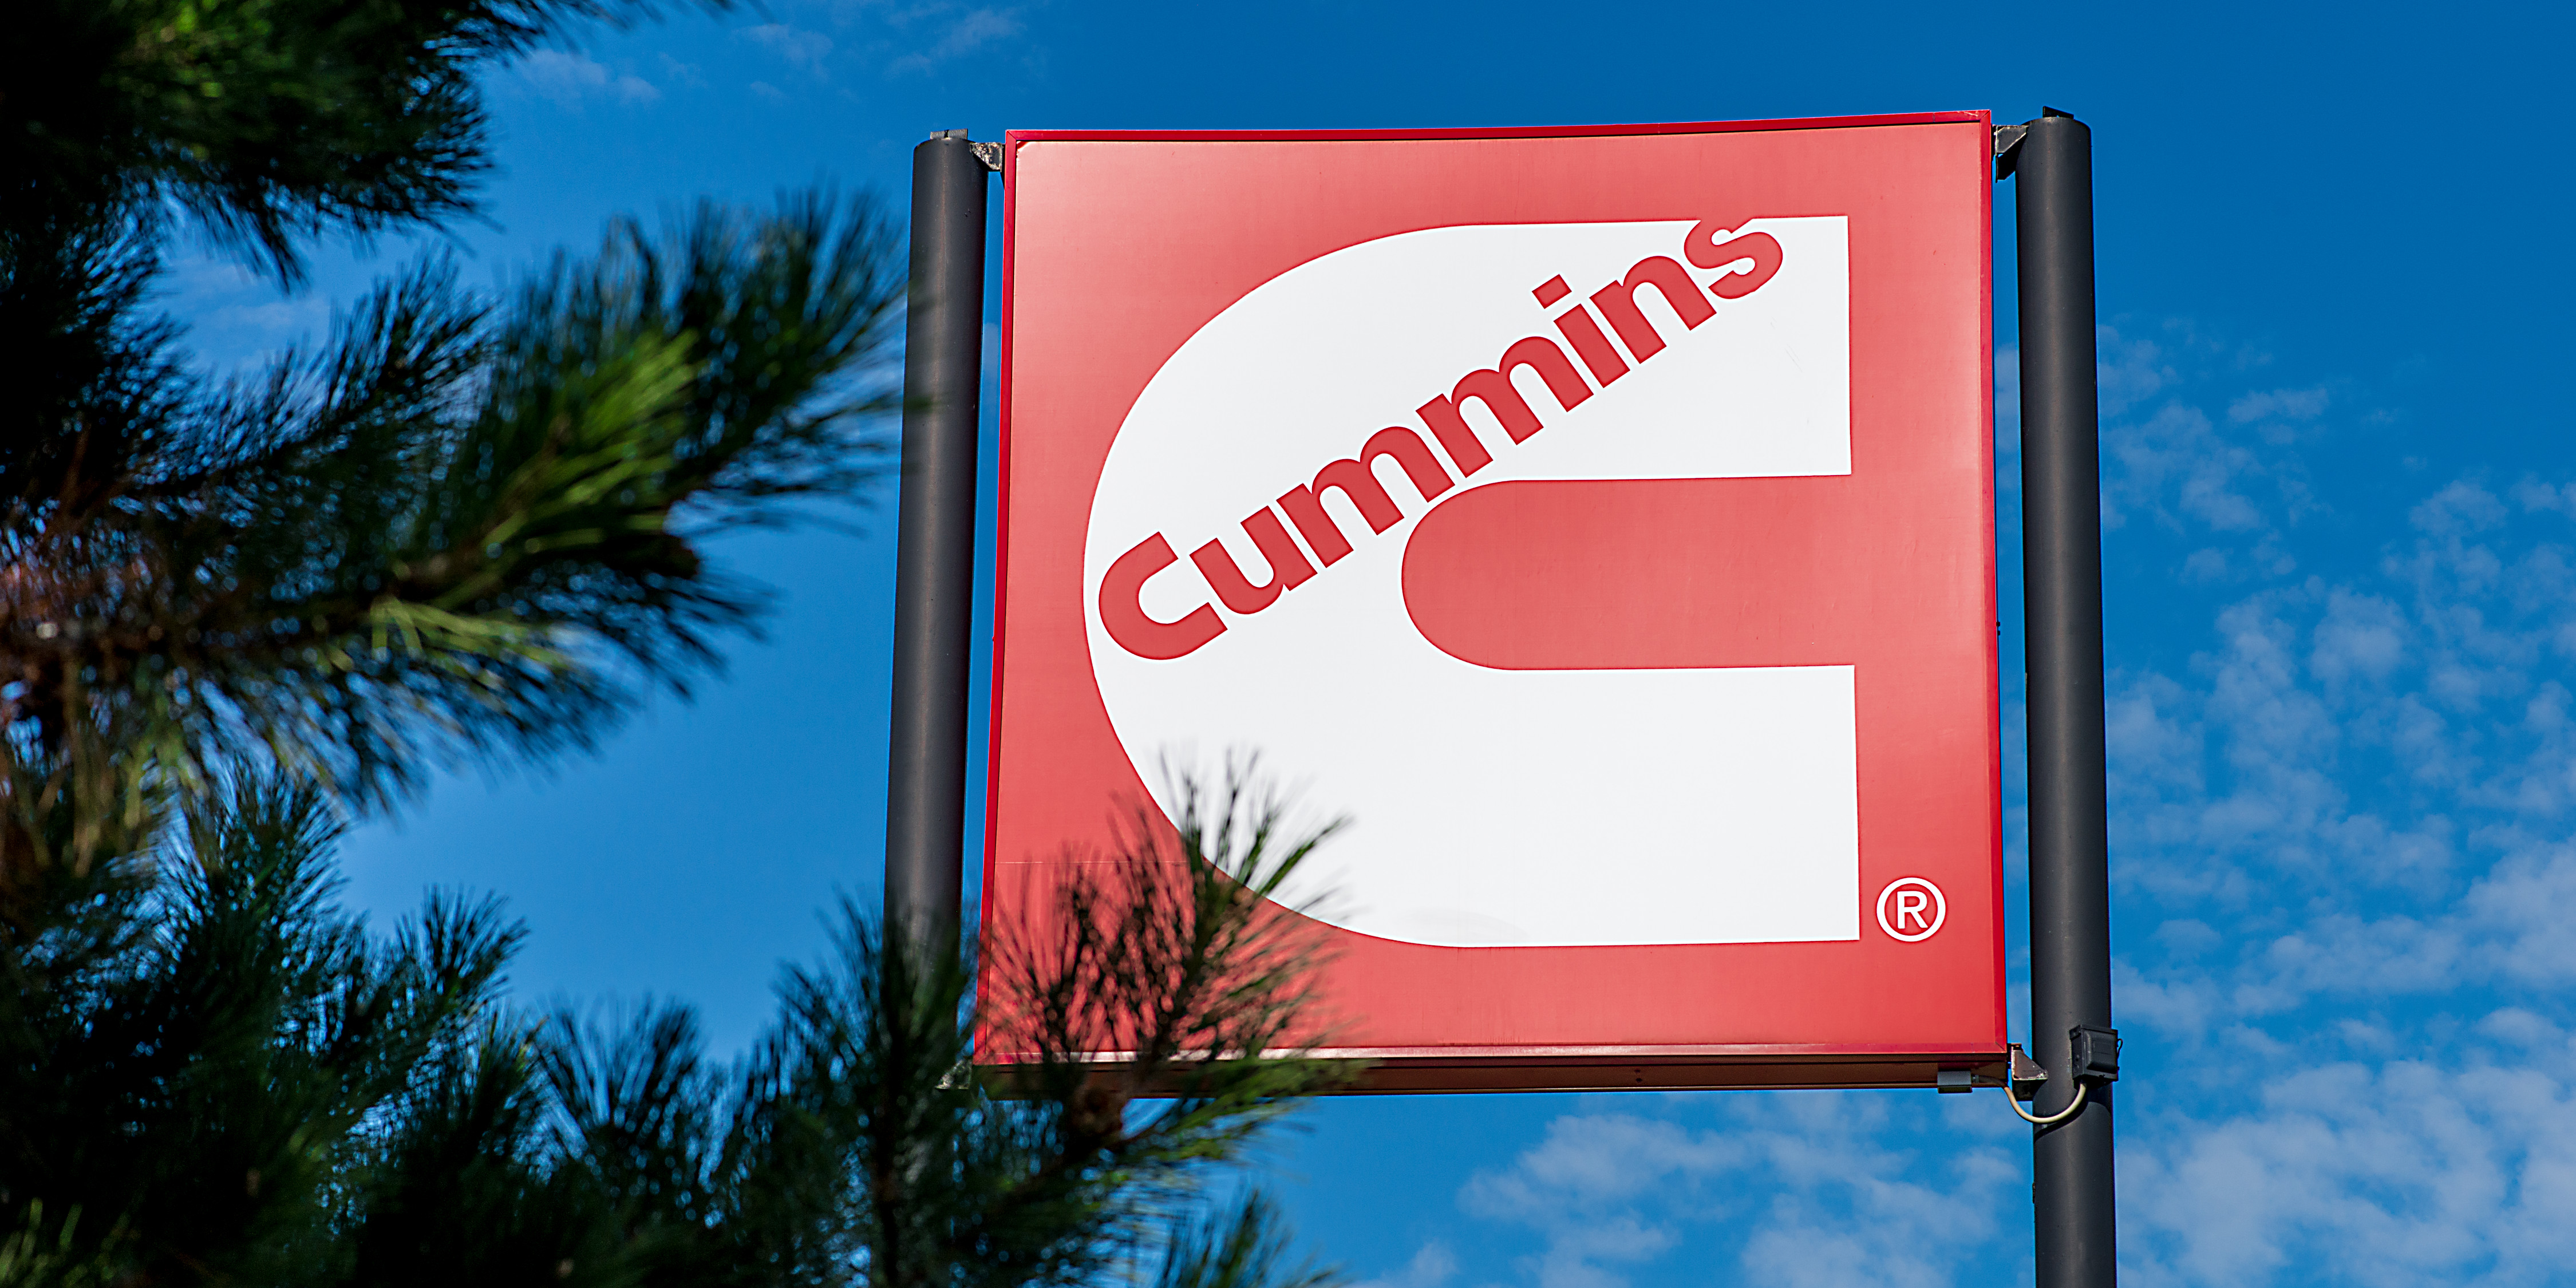 Cummins Inc., a global power leader, is a corporation of complementary business units that design, manufacture, distribute and service a broad portfolio of power solutions.